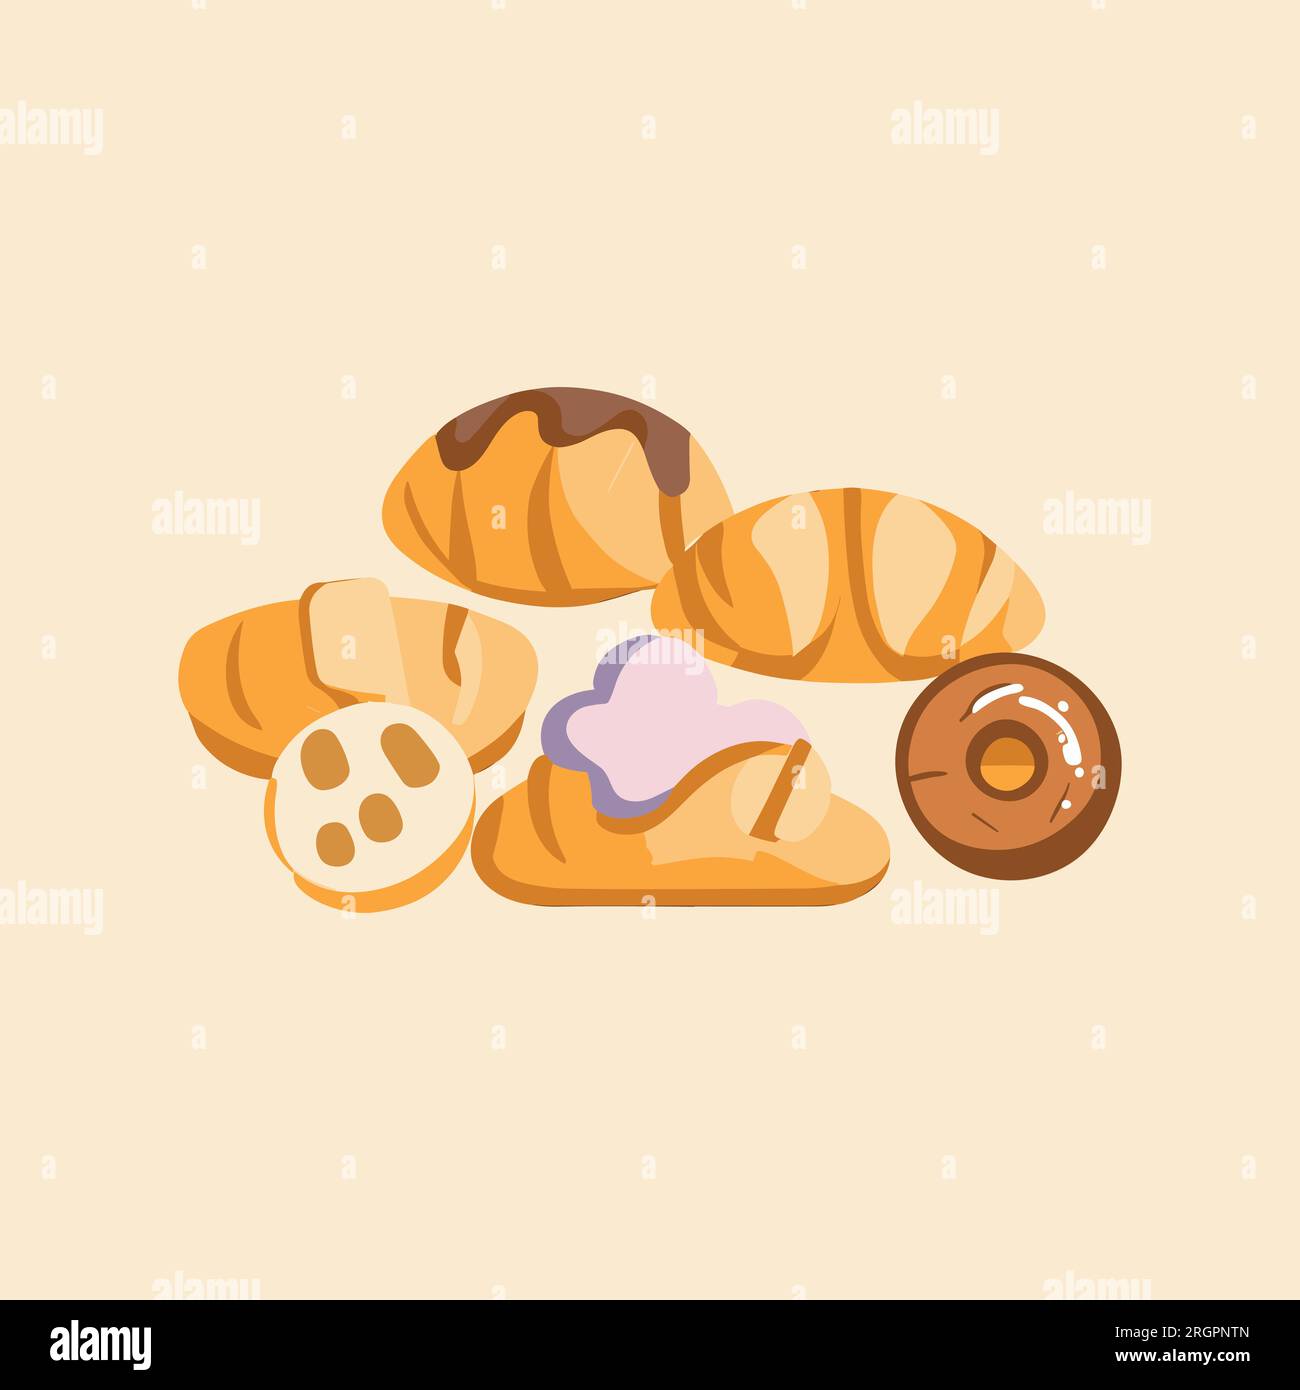 Bakery products vector illustration design Stock Vector